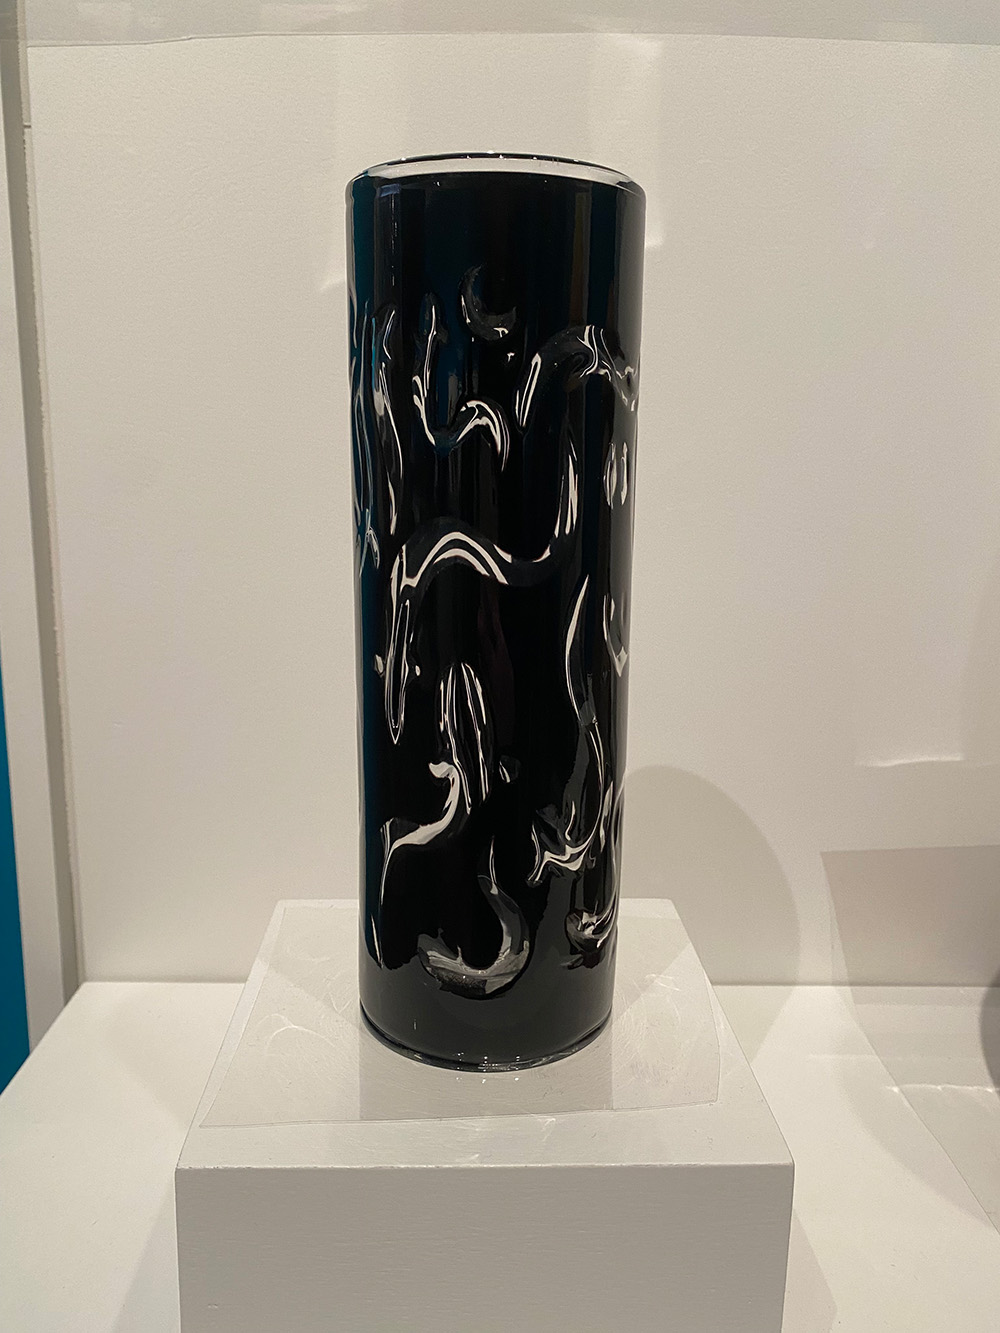 A tall black glass vase with white waves